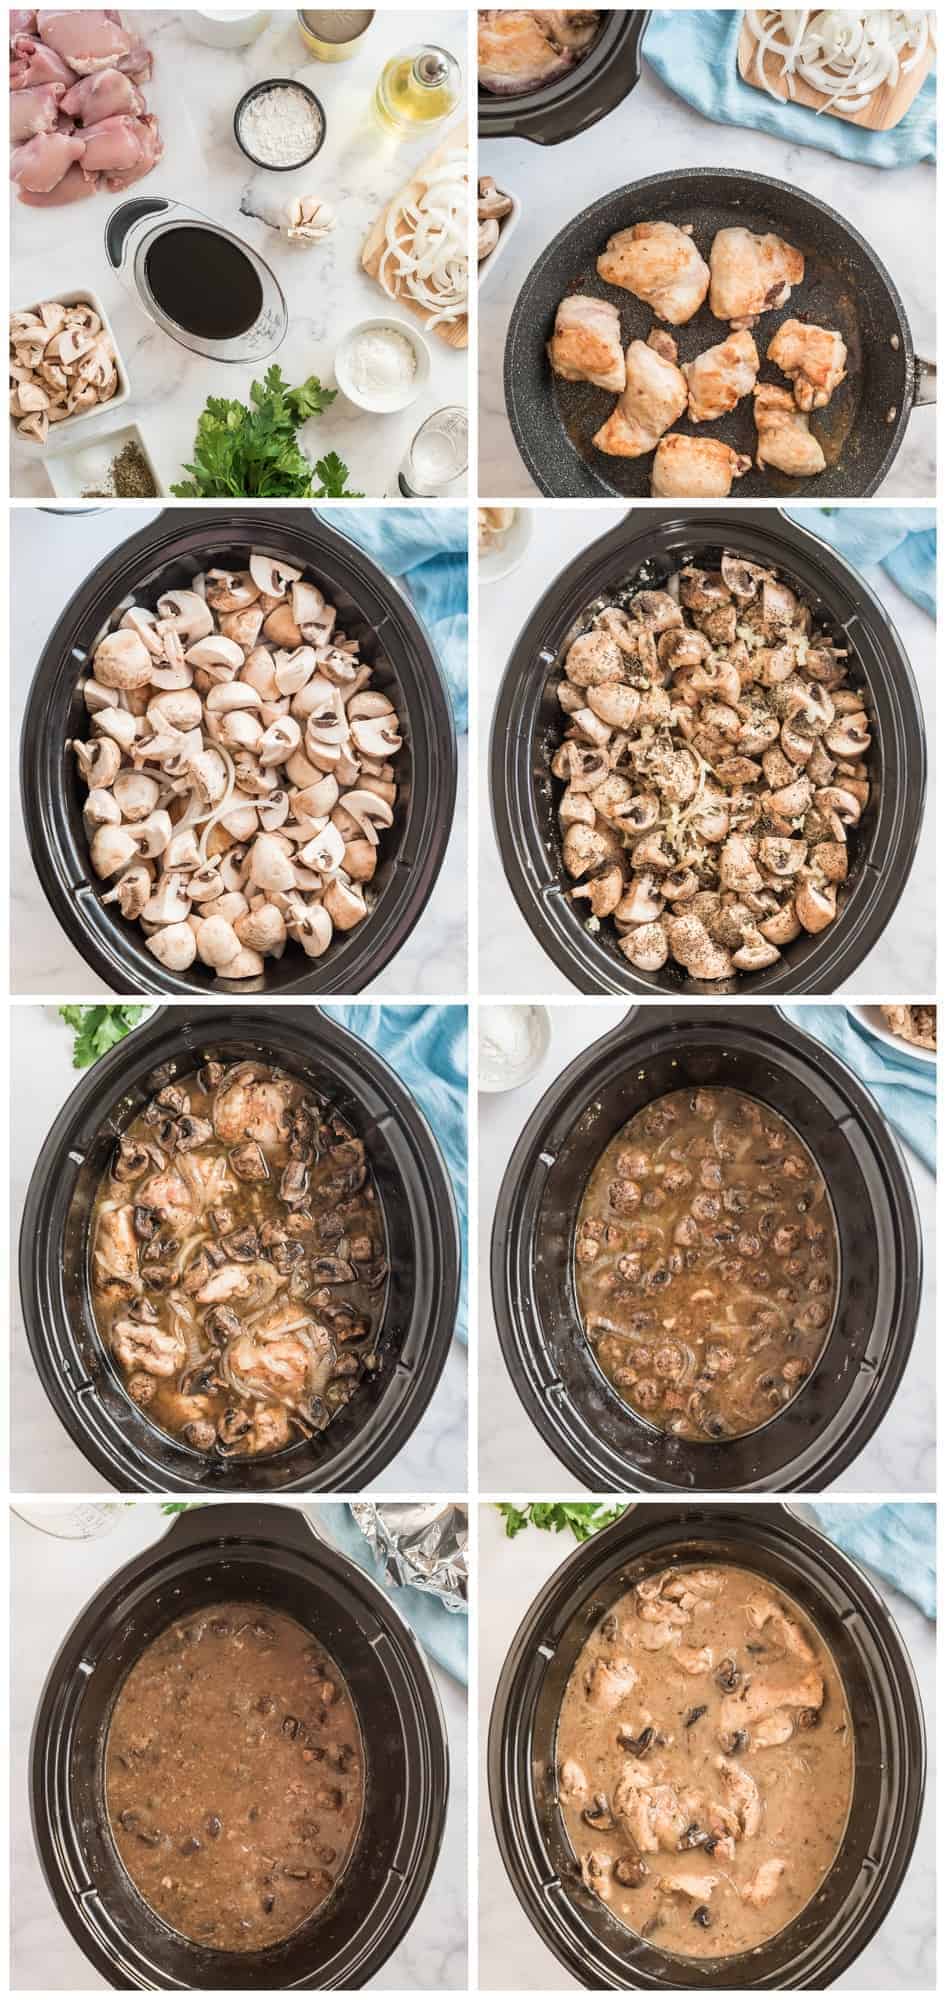 Step by step photos showing how to make chicken marsala in slow cooker.